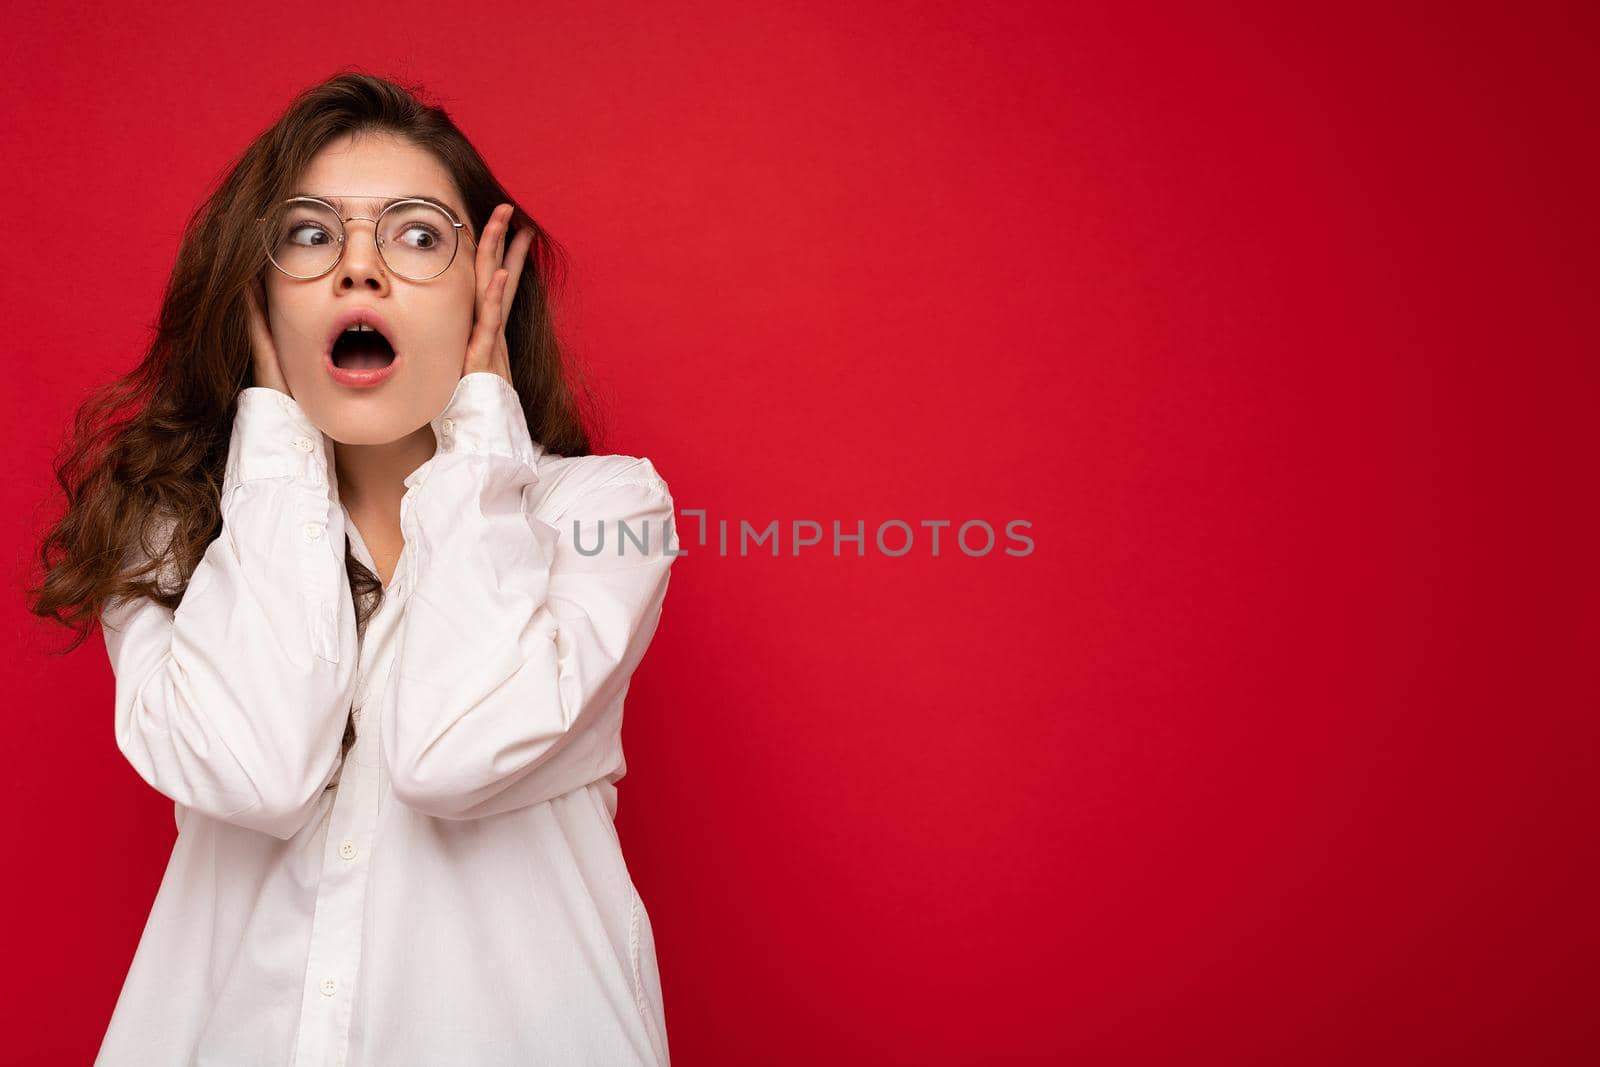 Attractive shocked amazed surprised young curly brunette woman wearing white shirt and optical glasses isolated on red background with empty space.